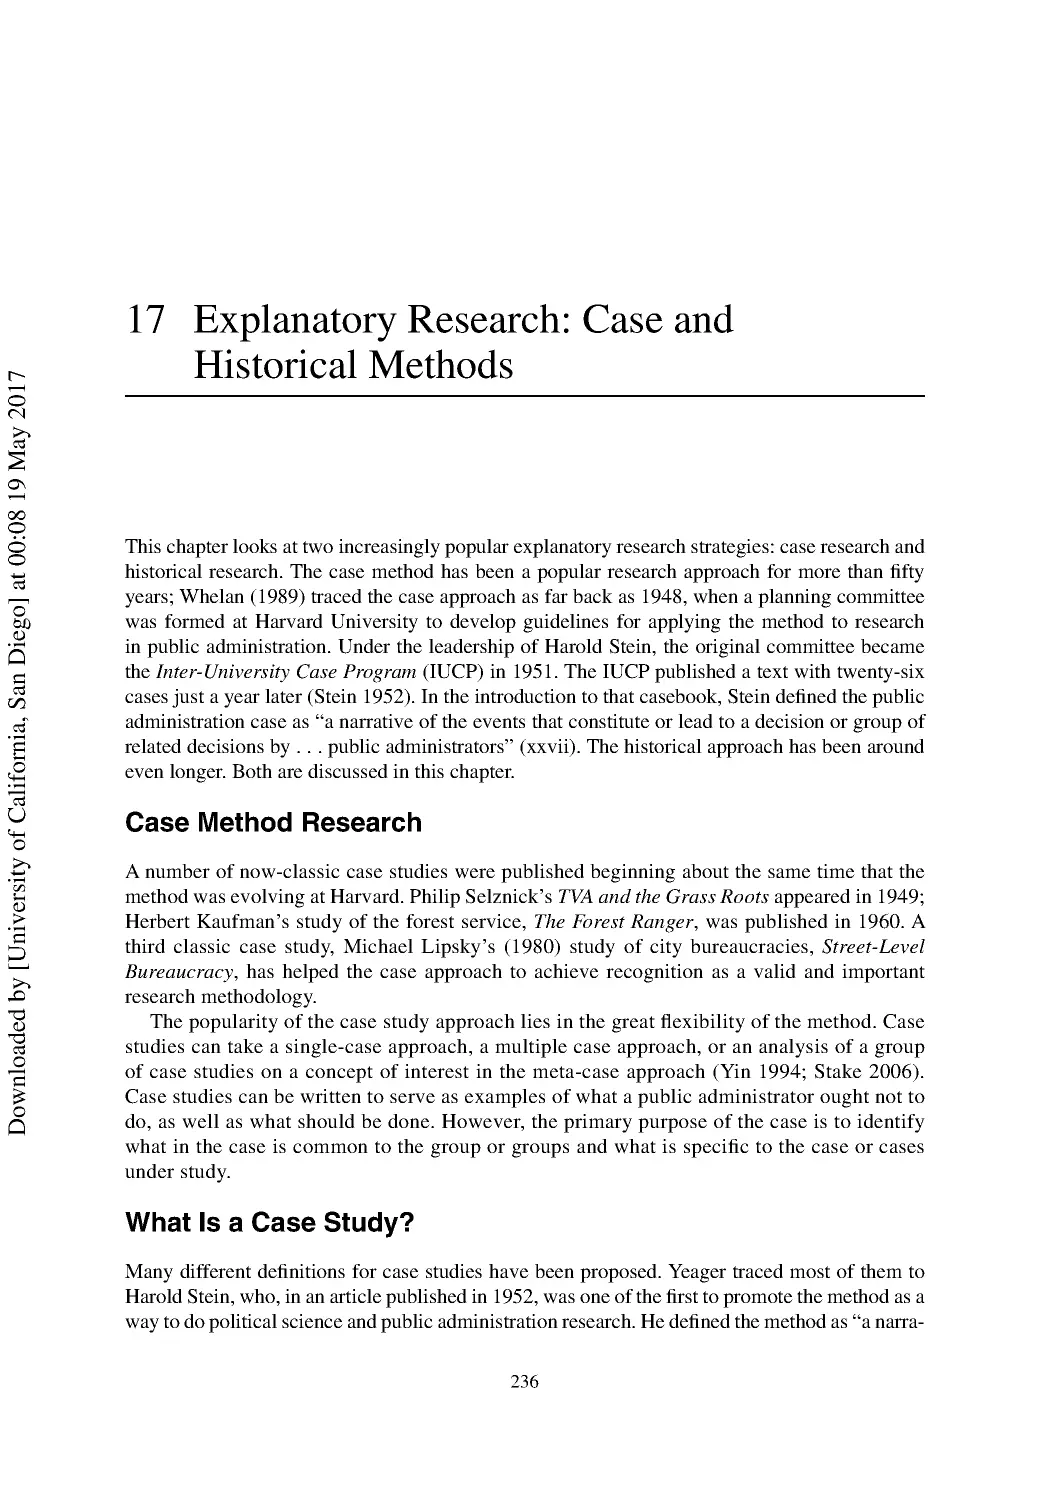 17 Explanatory Research: Case and Historical Methods
What Is a Case Study?